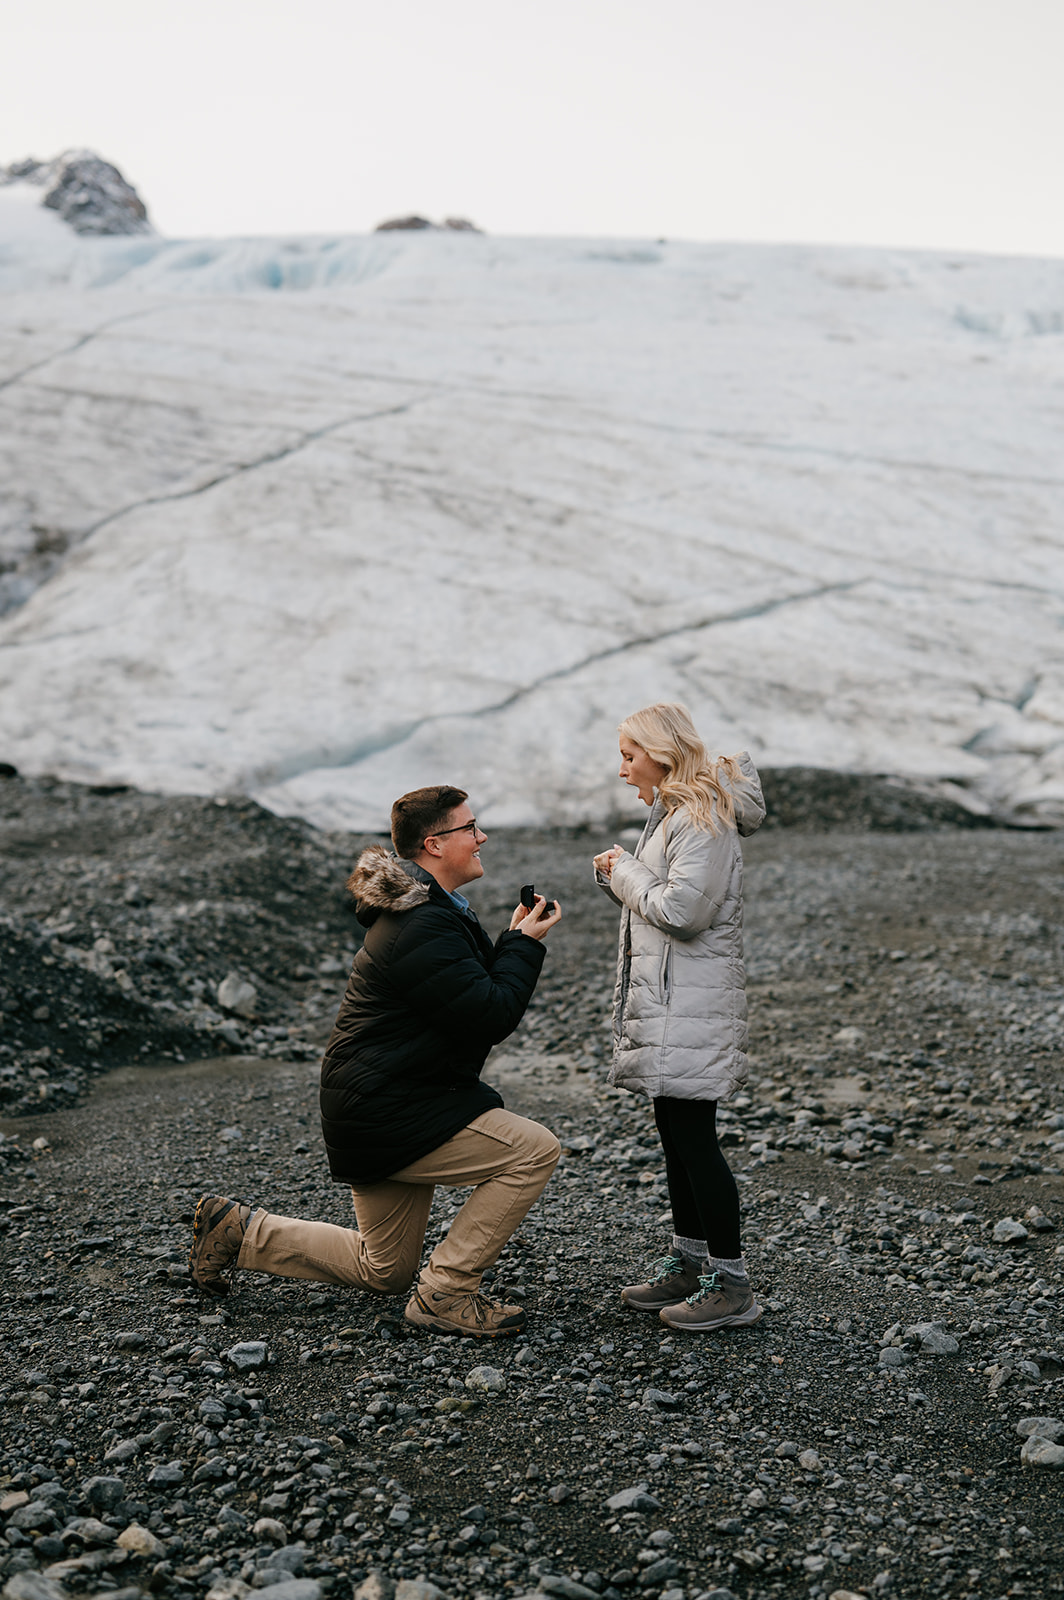 Man gets down on one knee to propose in front of a glacier.